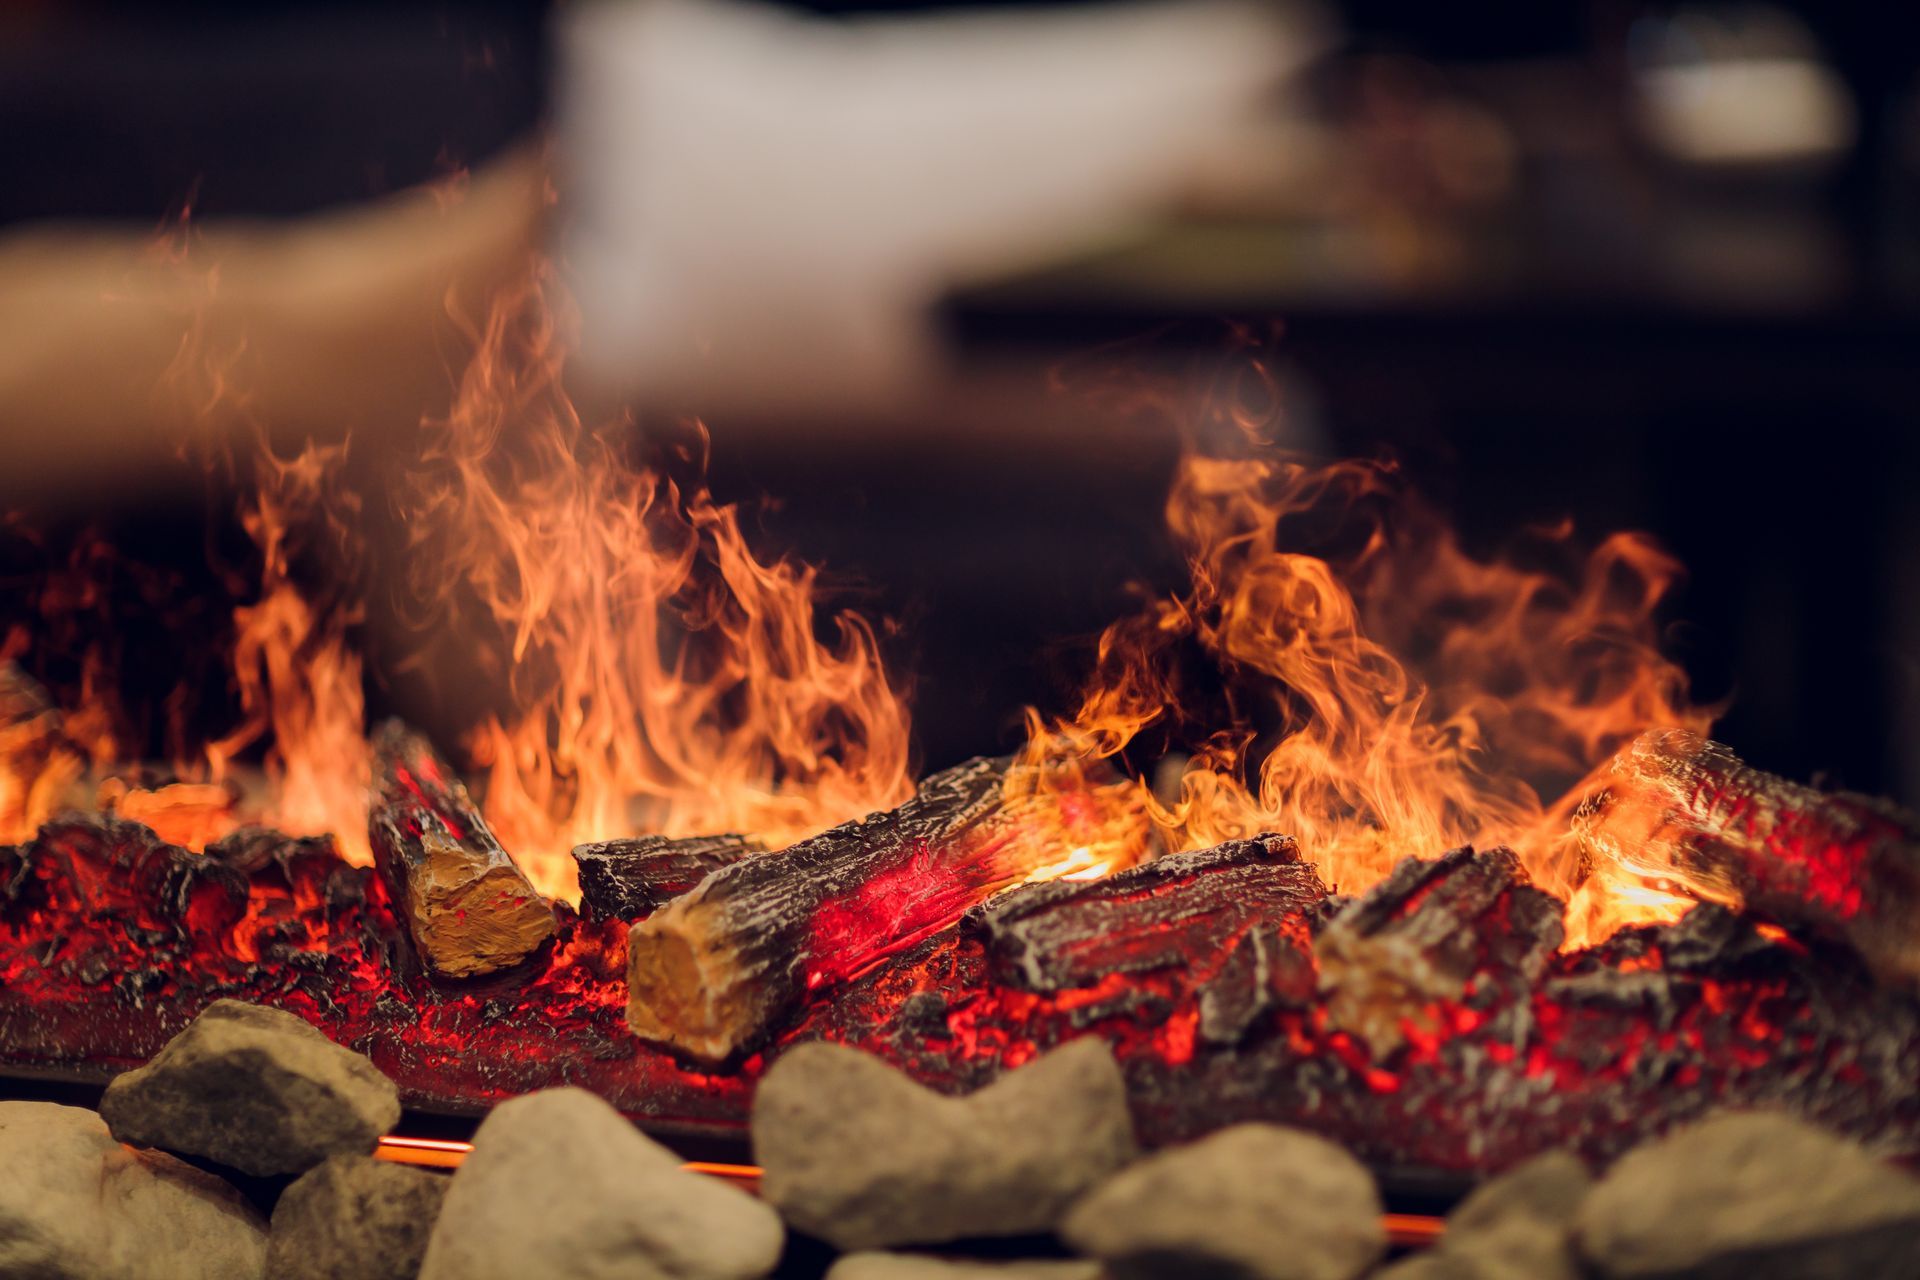 a close up of a fireplace filled with logs and flames .